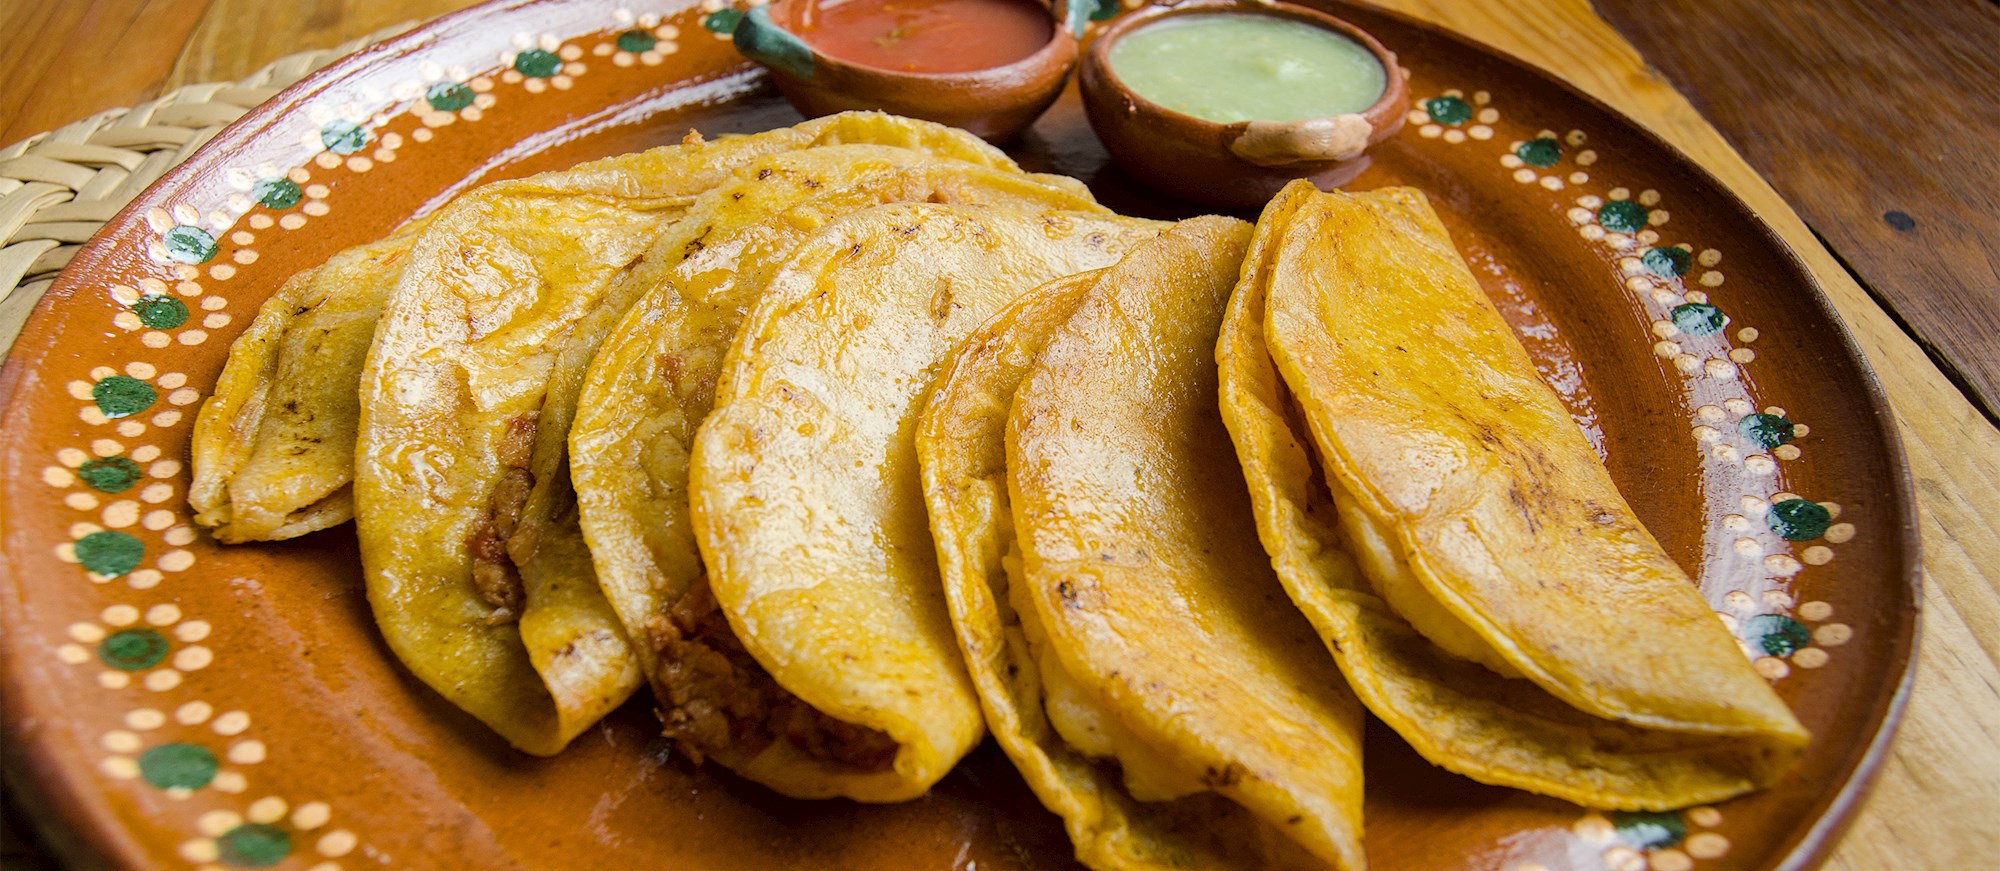 Where to Eat the Best Tacos de Canasta in Mexico City? | TasteAtlas